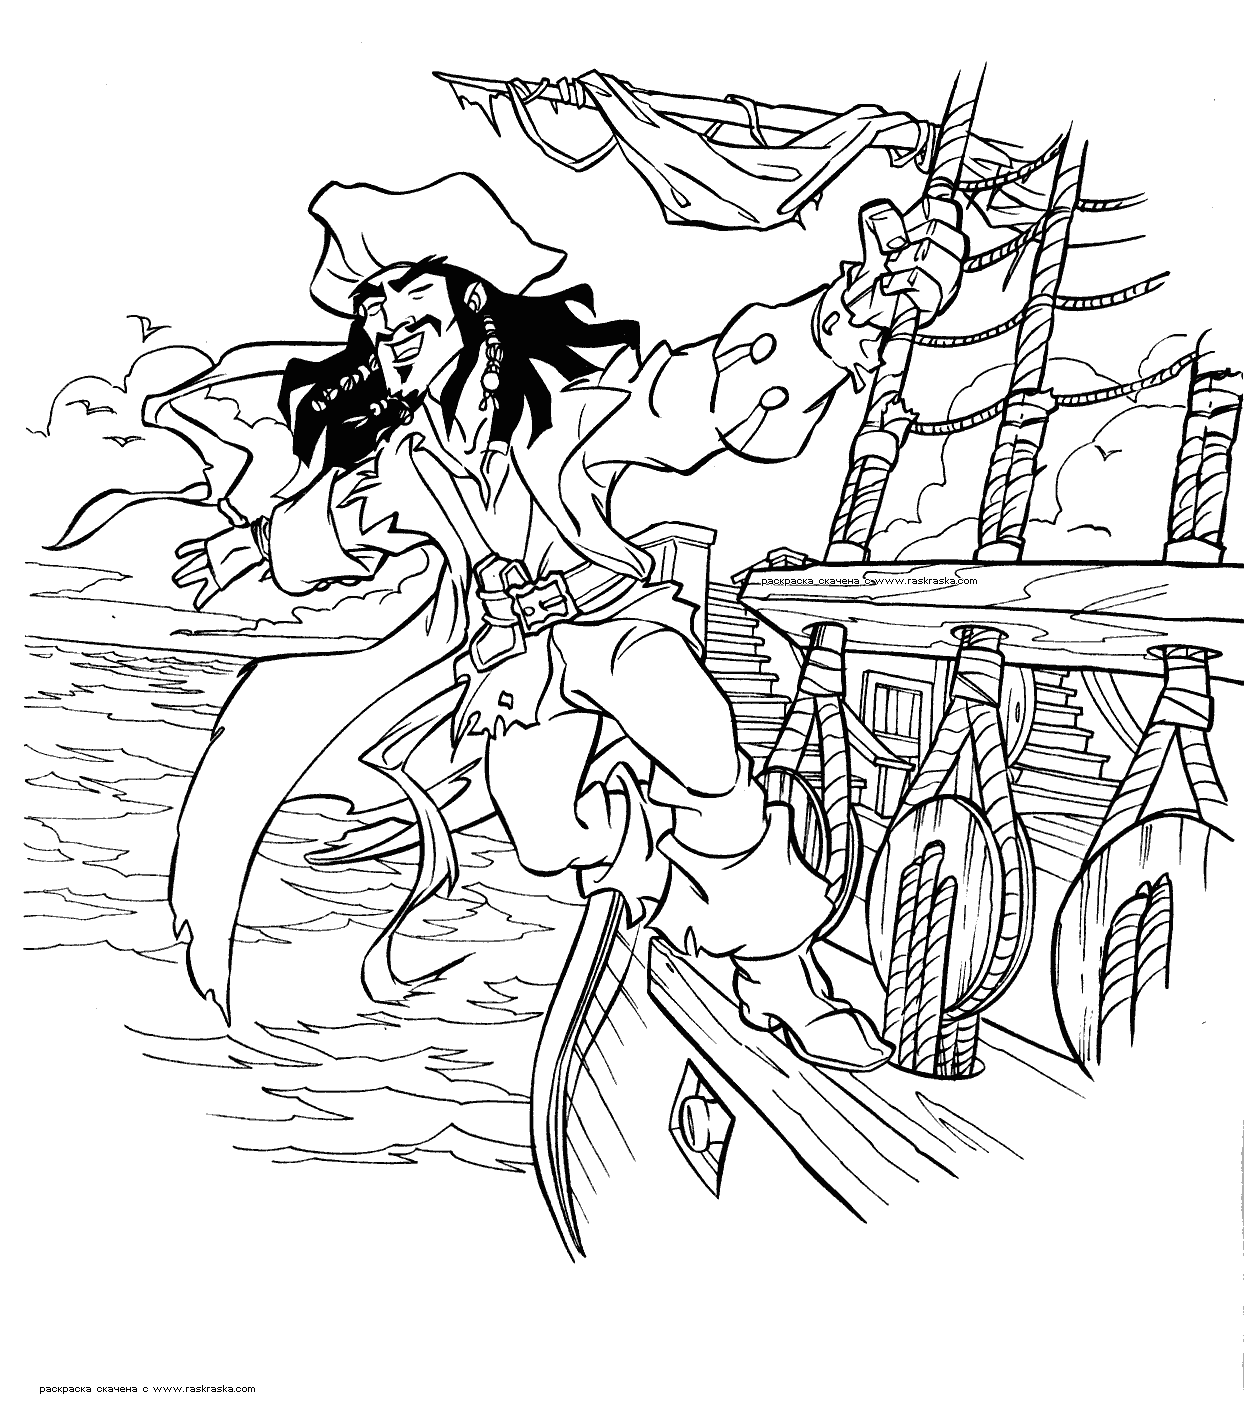 pirates of the caribbean pictures to print pirates of caribbean coloring pages coloring pages to the caribbean pictures to print of pirates 